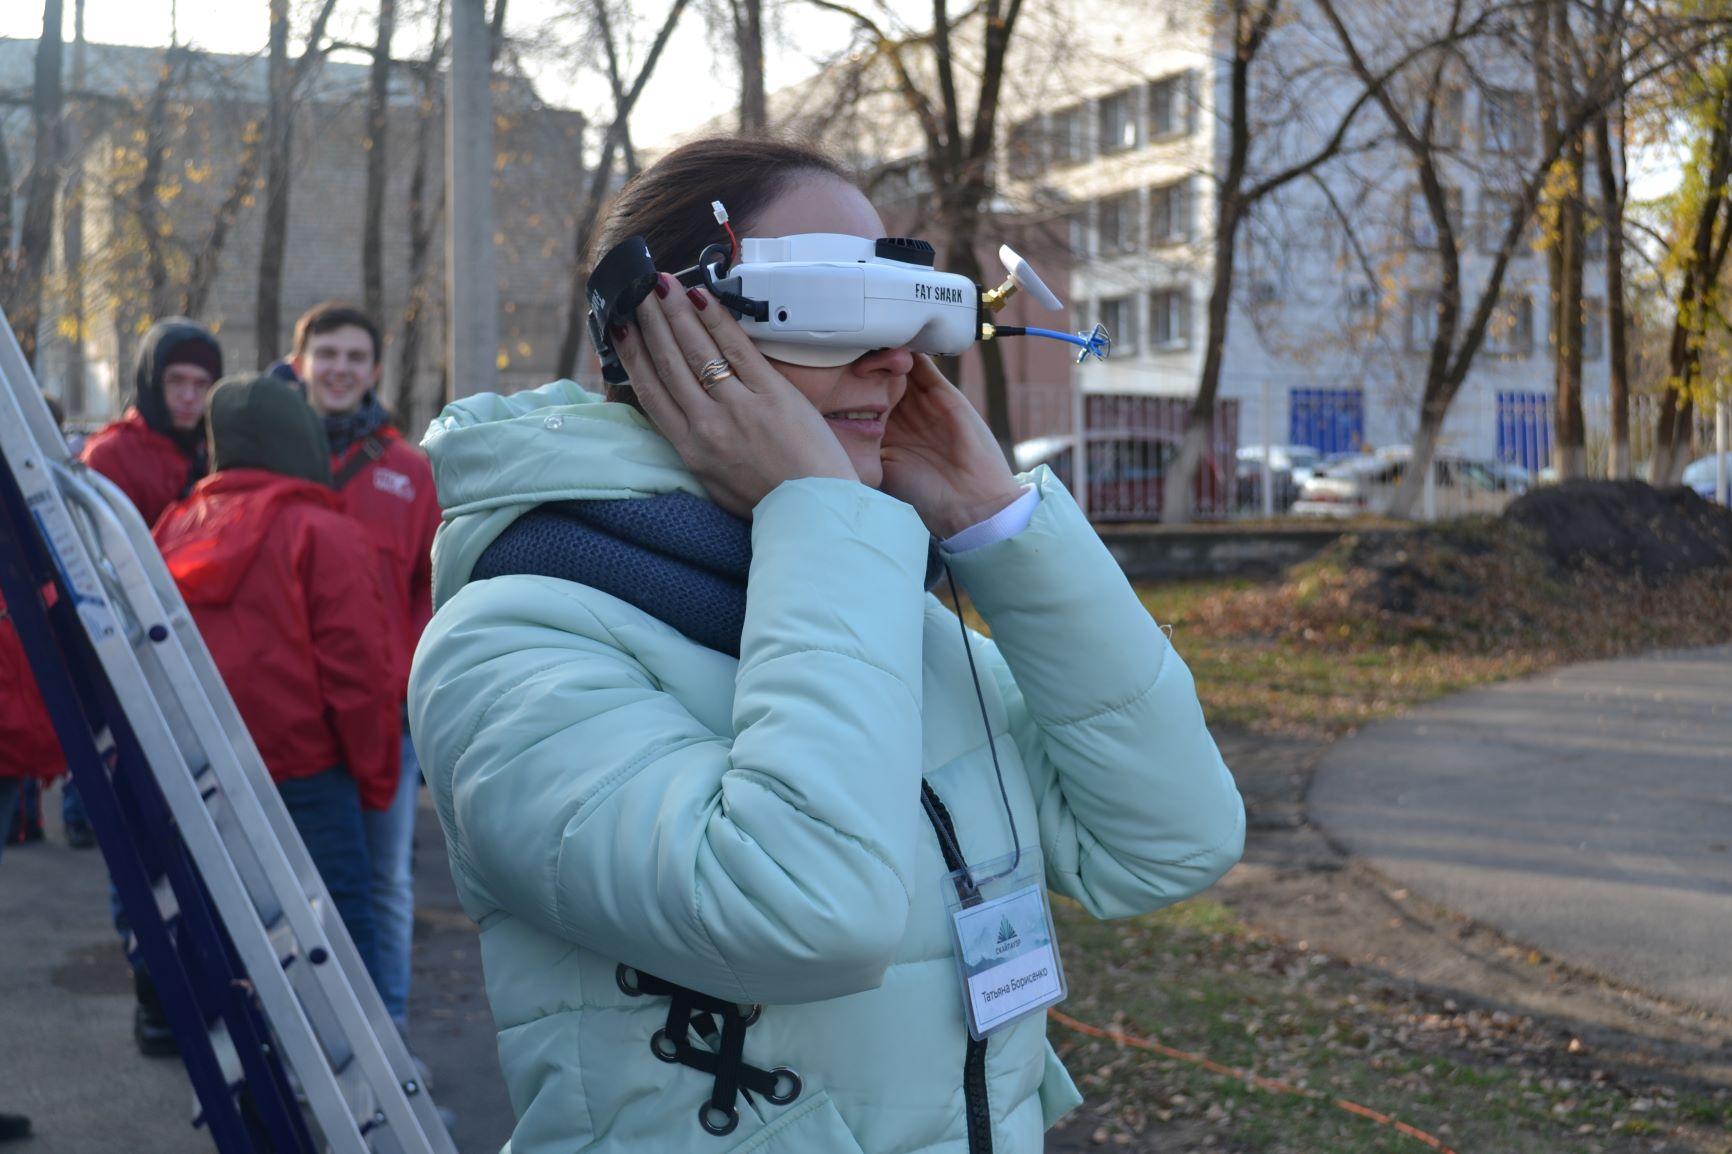 Drone racing comes to the Belgorod Region: TH Group and Skypower engineers held a first drone racing master class.